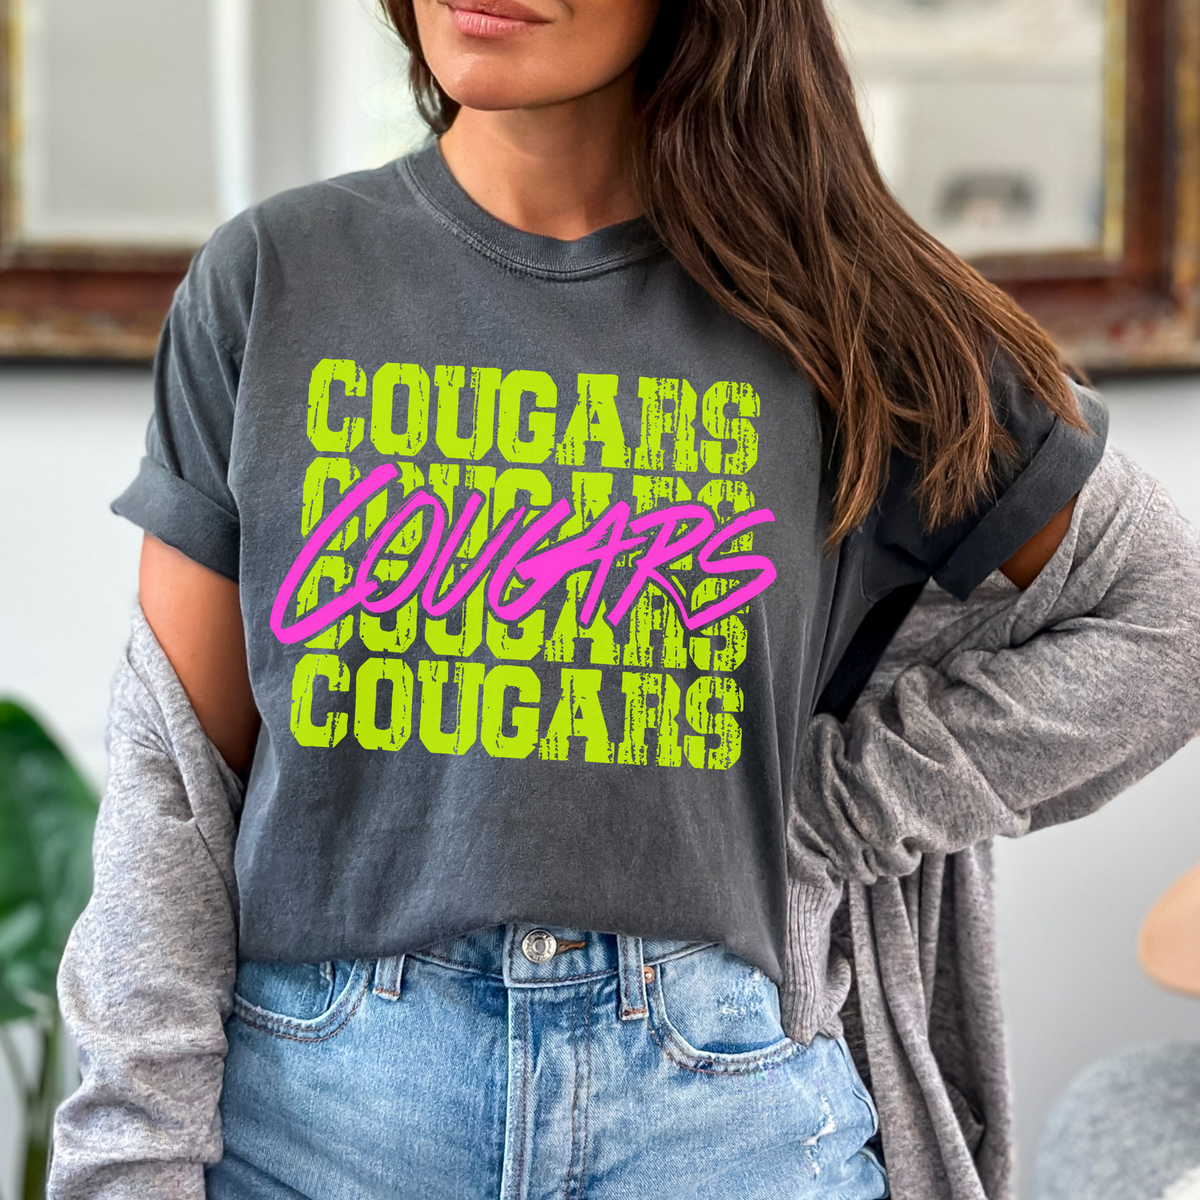 Cougars Stacked Cutout Bright Yellow & Pink Digital Design, PNG